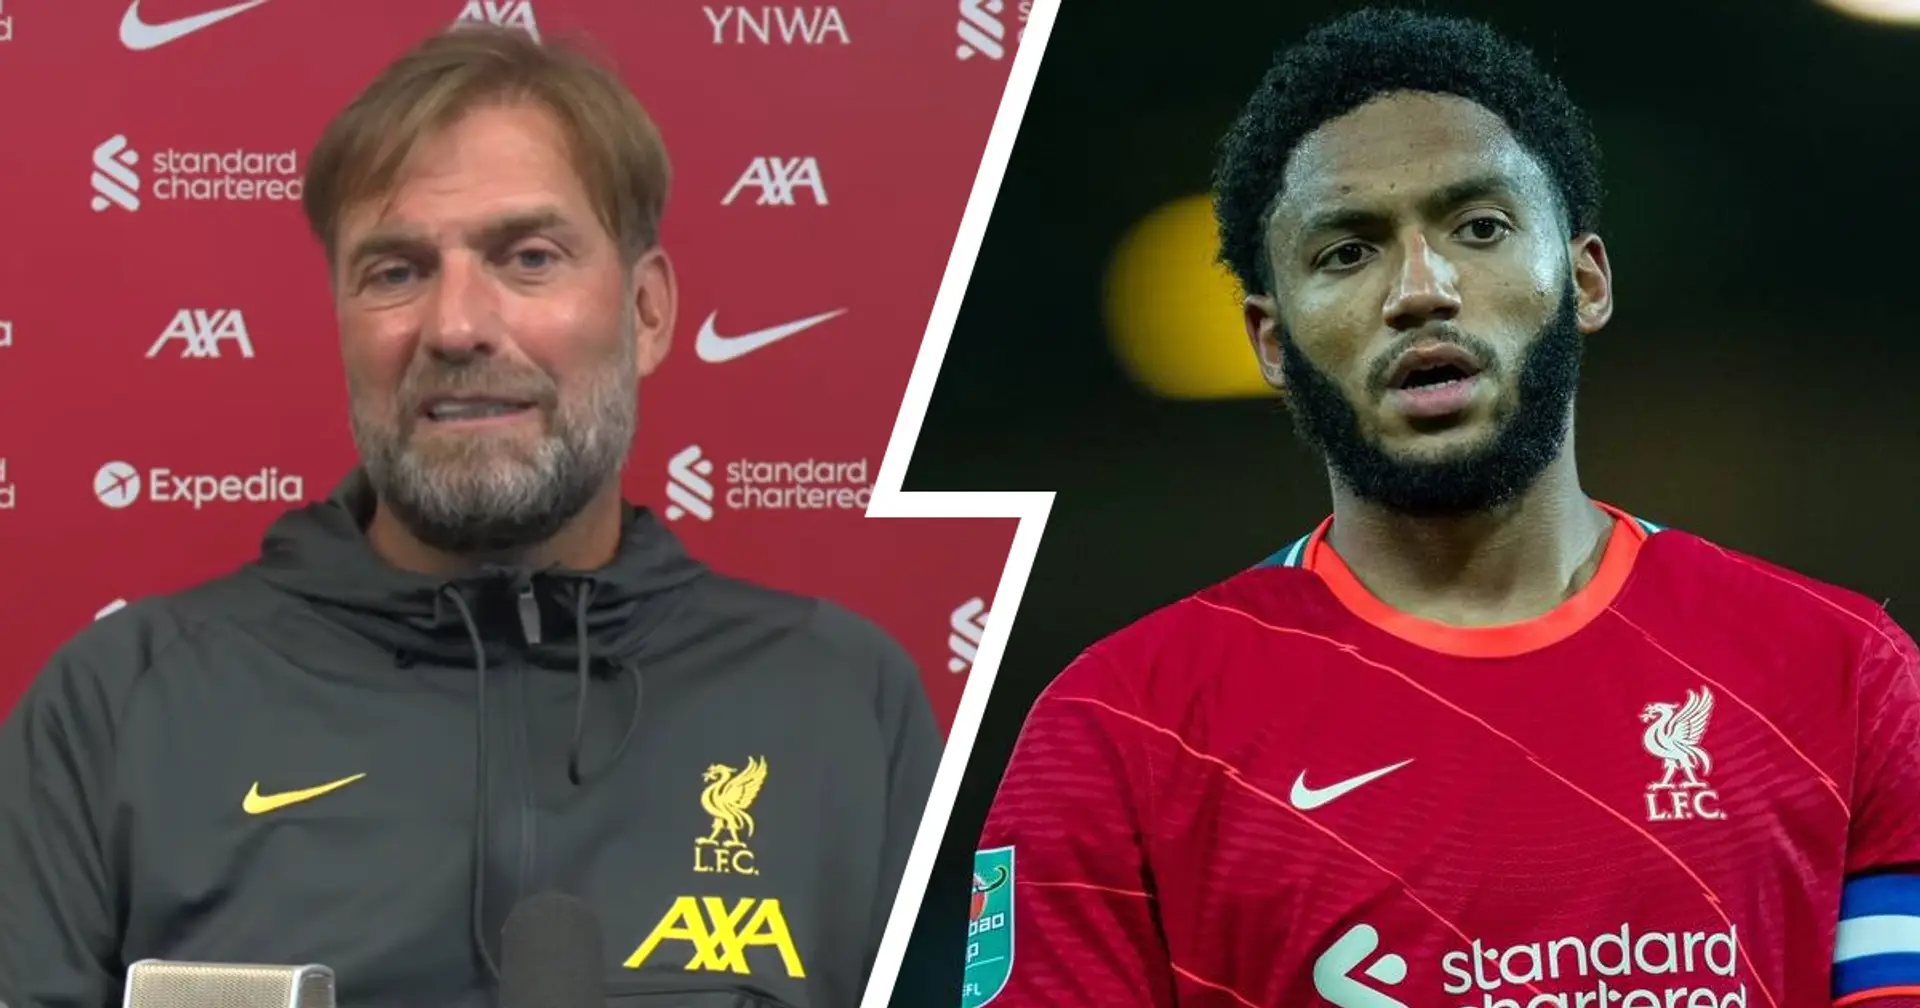 'People are already talking about this': Klopp discusses Gomez's lack of game time